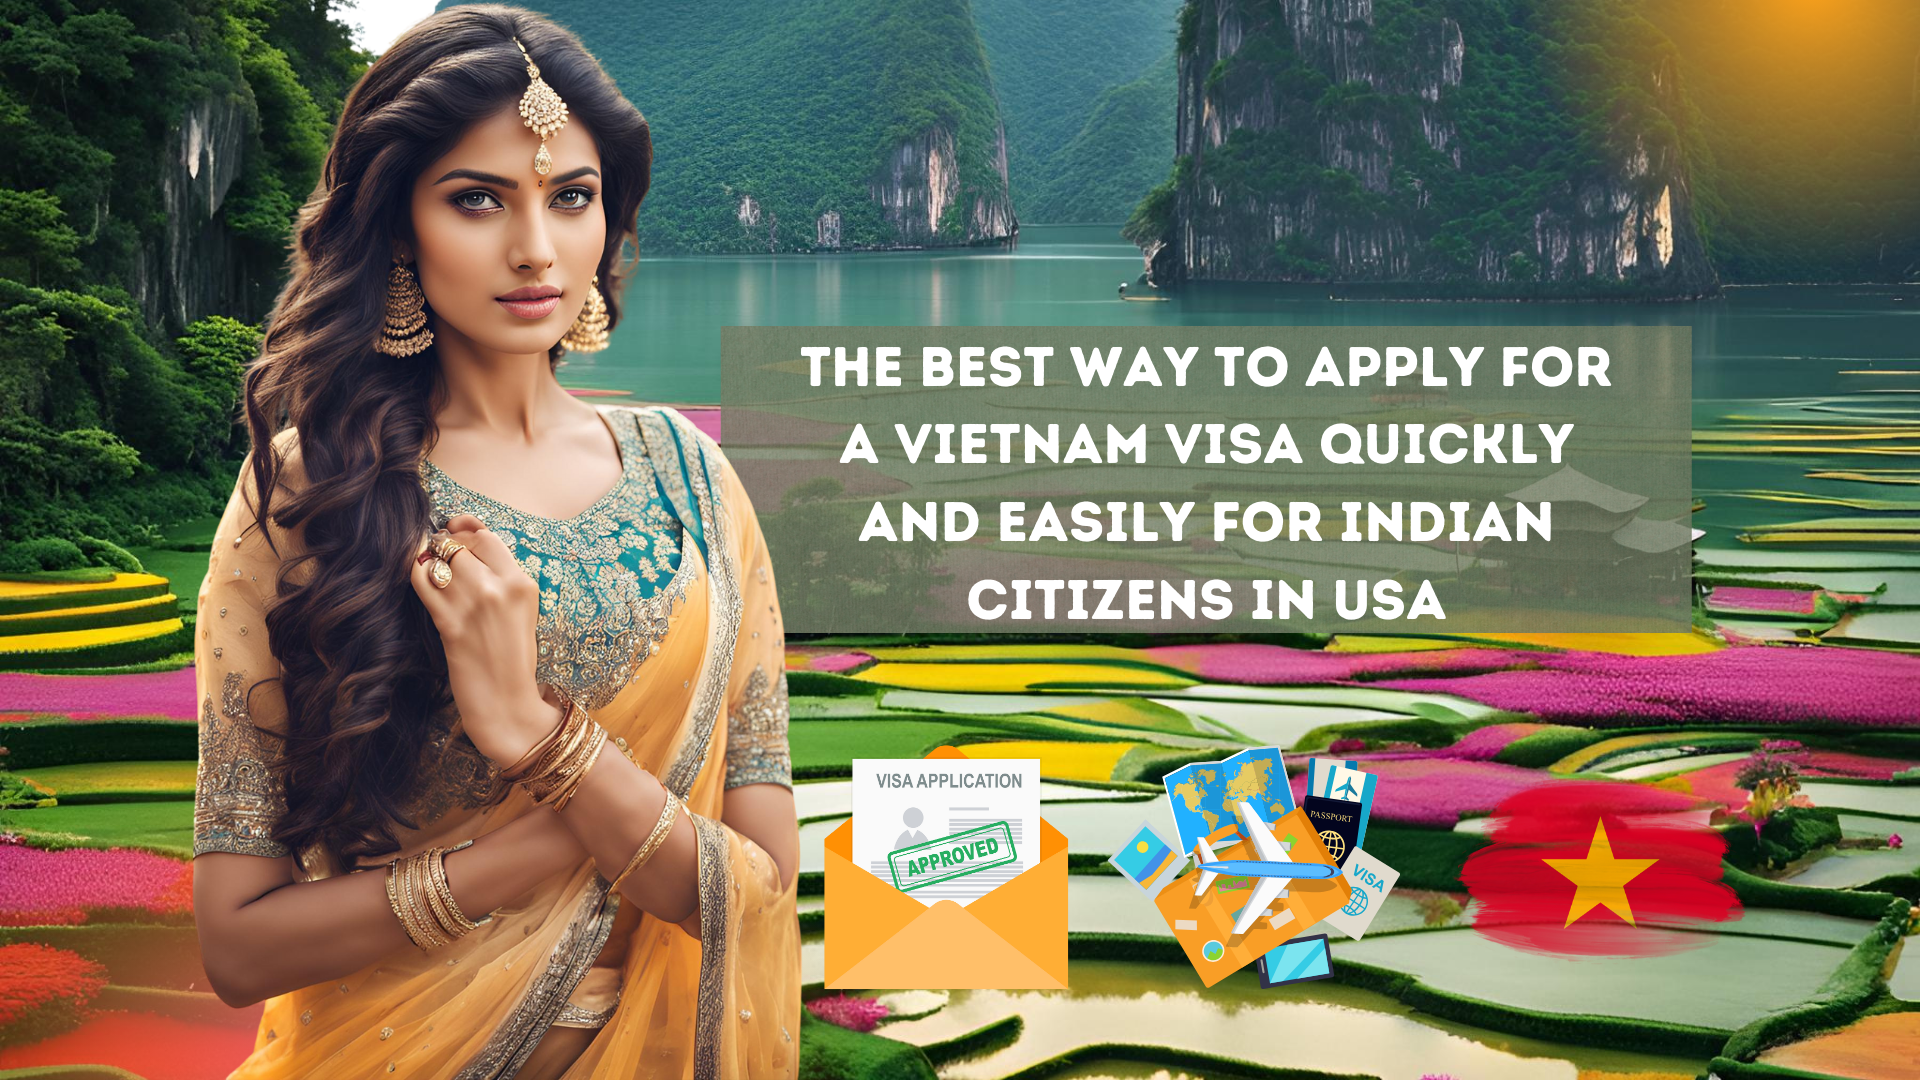 The best way to apply for a Vietnam visa quickly and easily for Indian citizens in USA